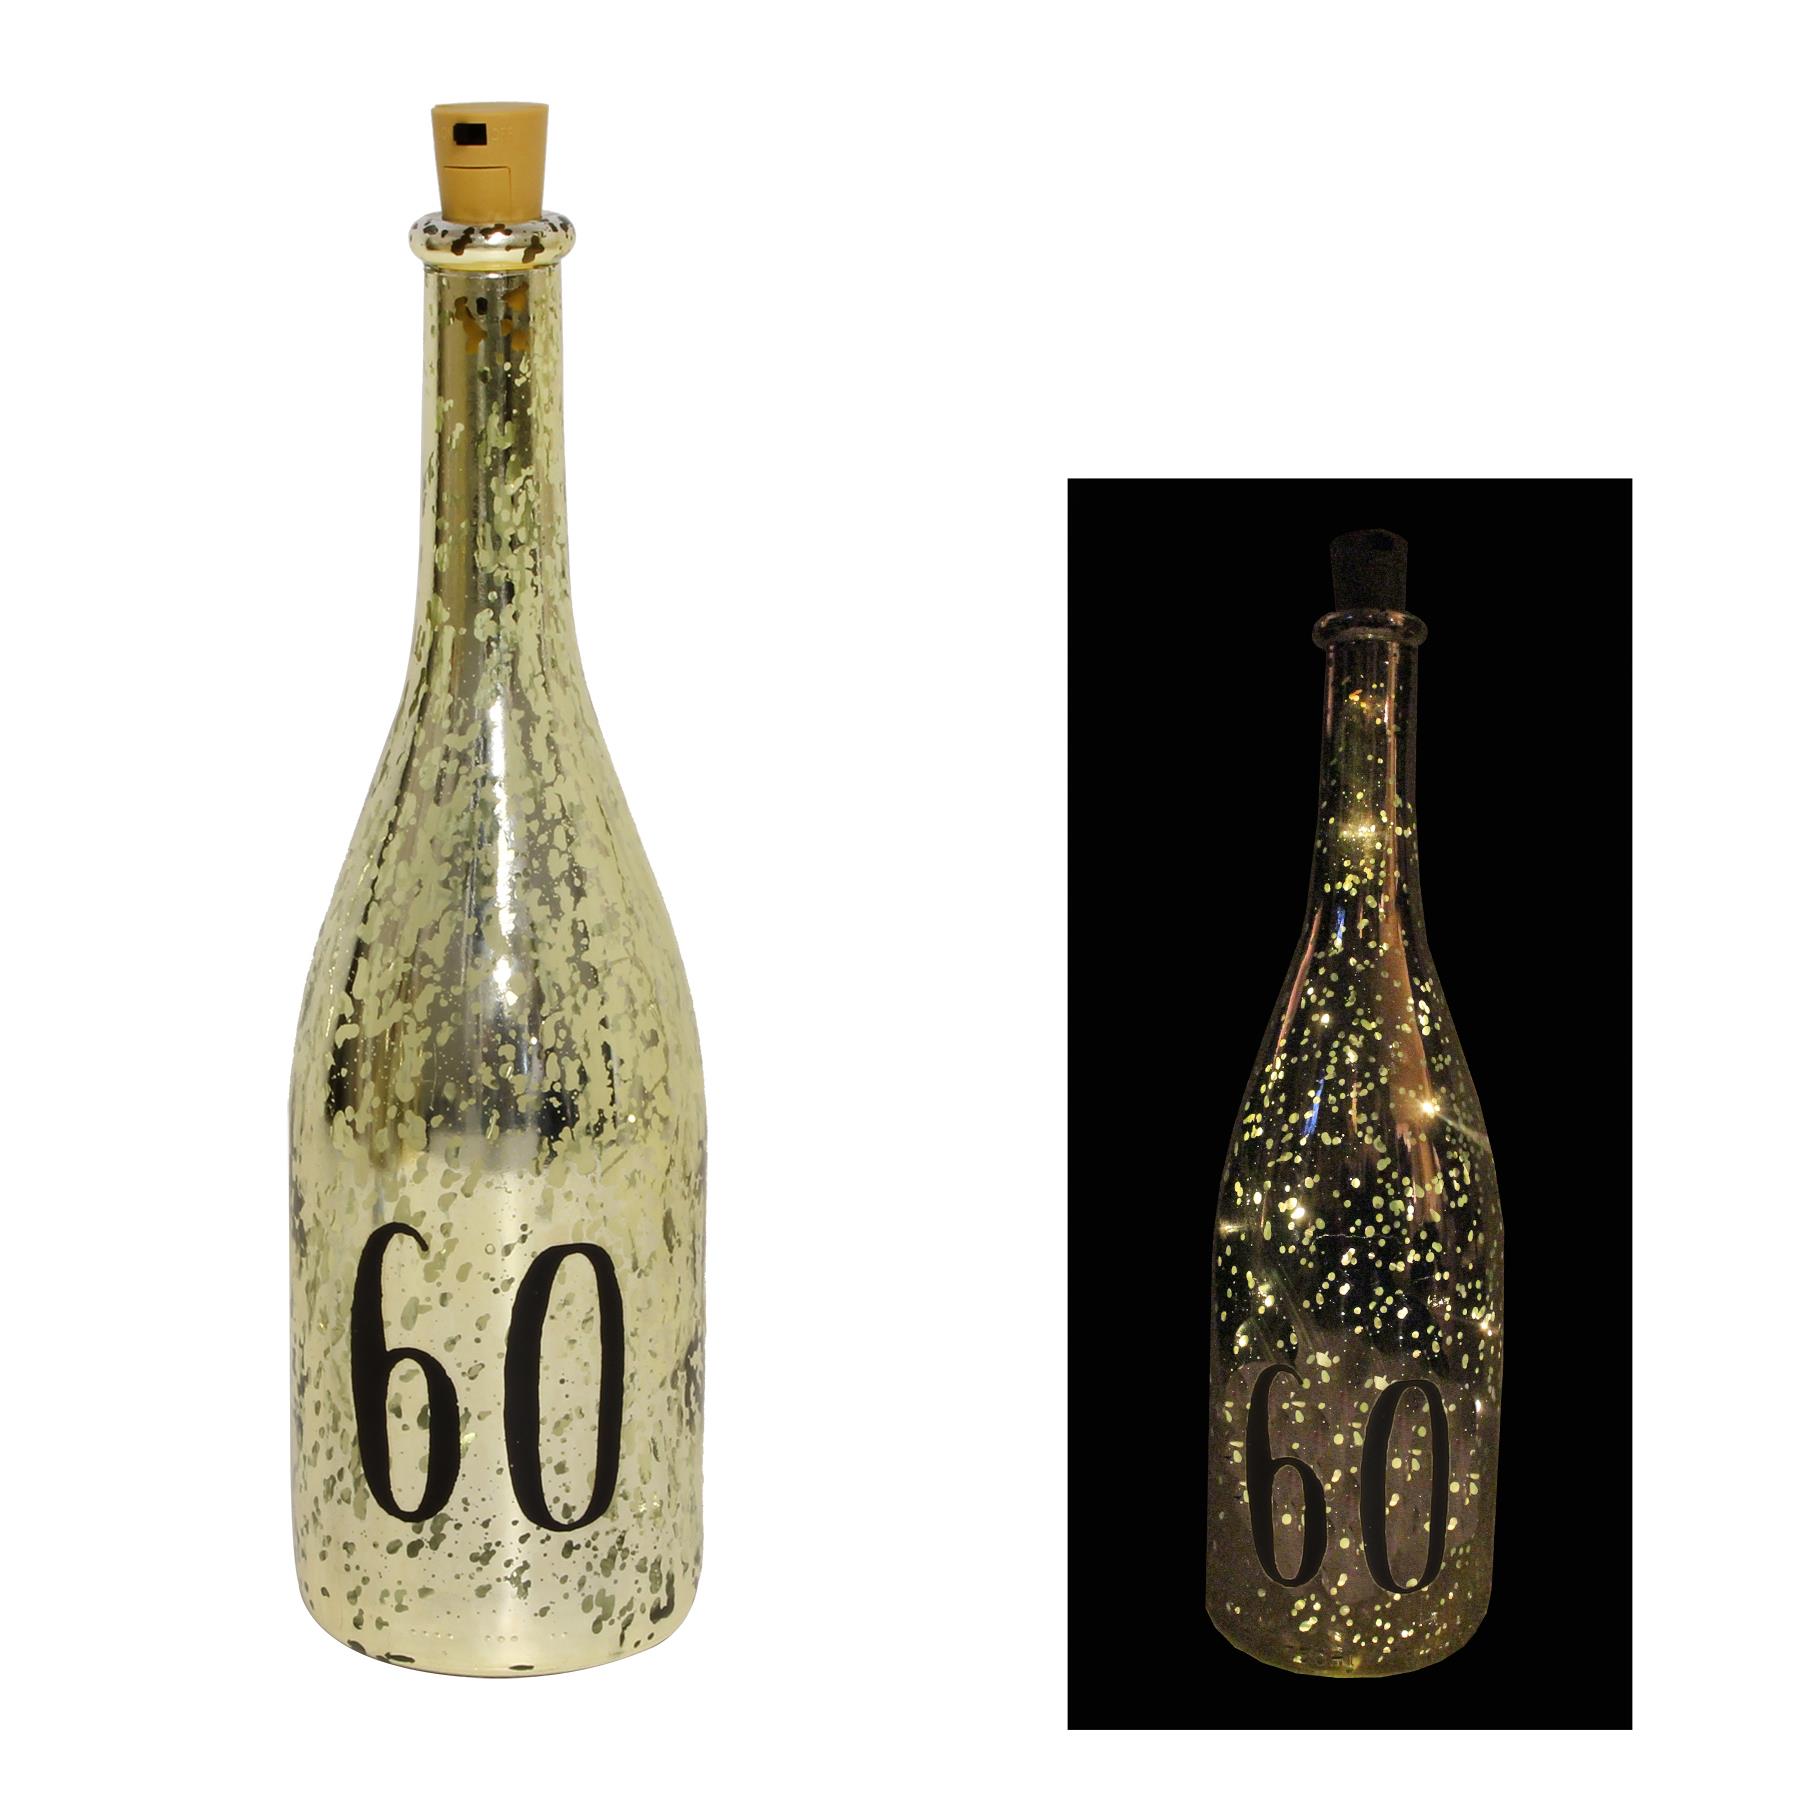 Gold Crackle Glaze Battery Light Up Bottle with Number - 60th Birthday